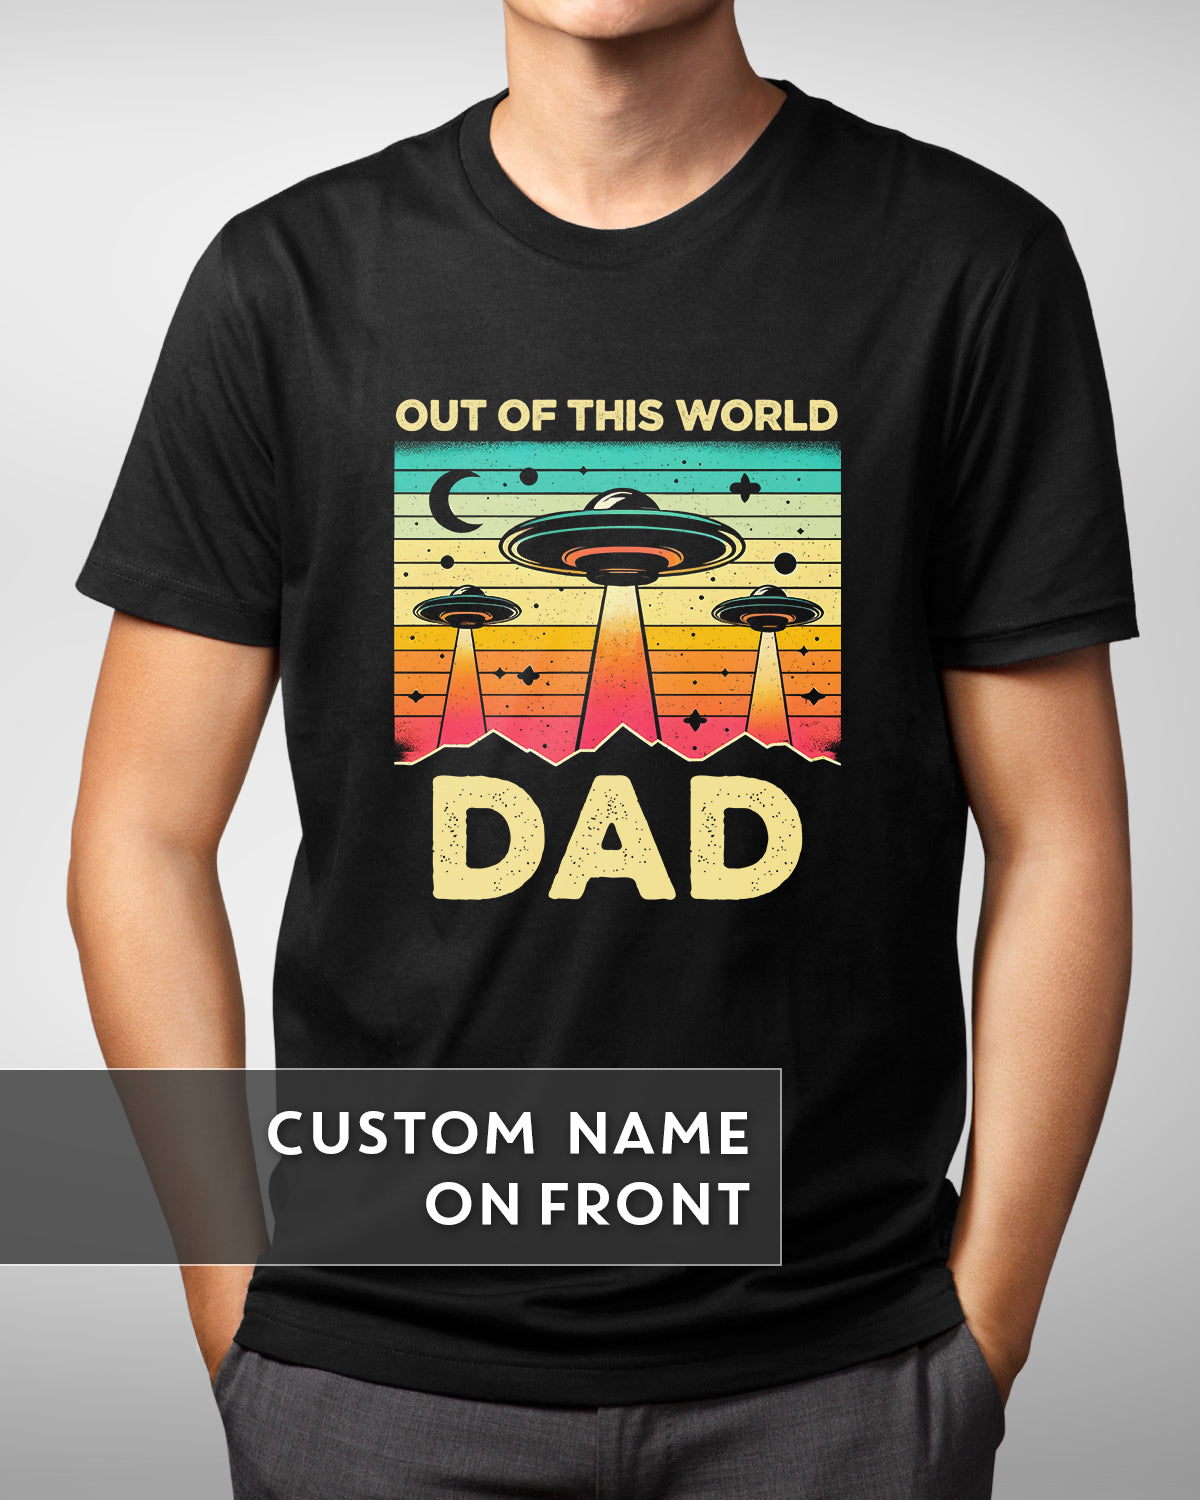 Out Of This World Shirt, Alien UFO Flying Saucer Tee, Father's Day Gift, Extraterrestrial Life, Custom Family Name